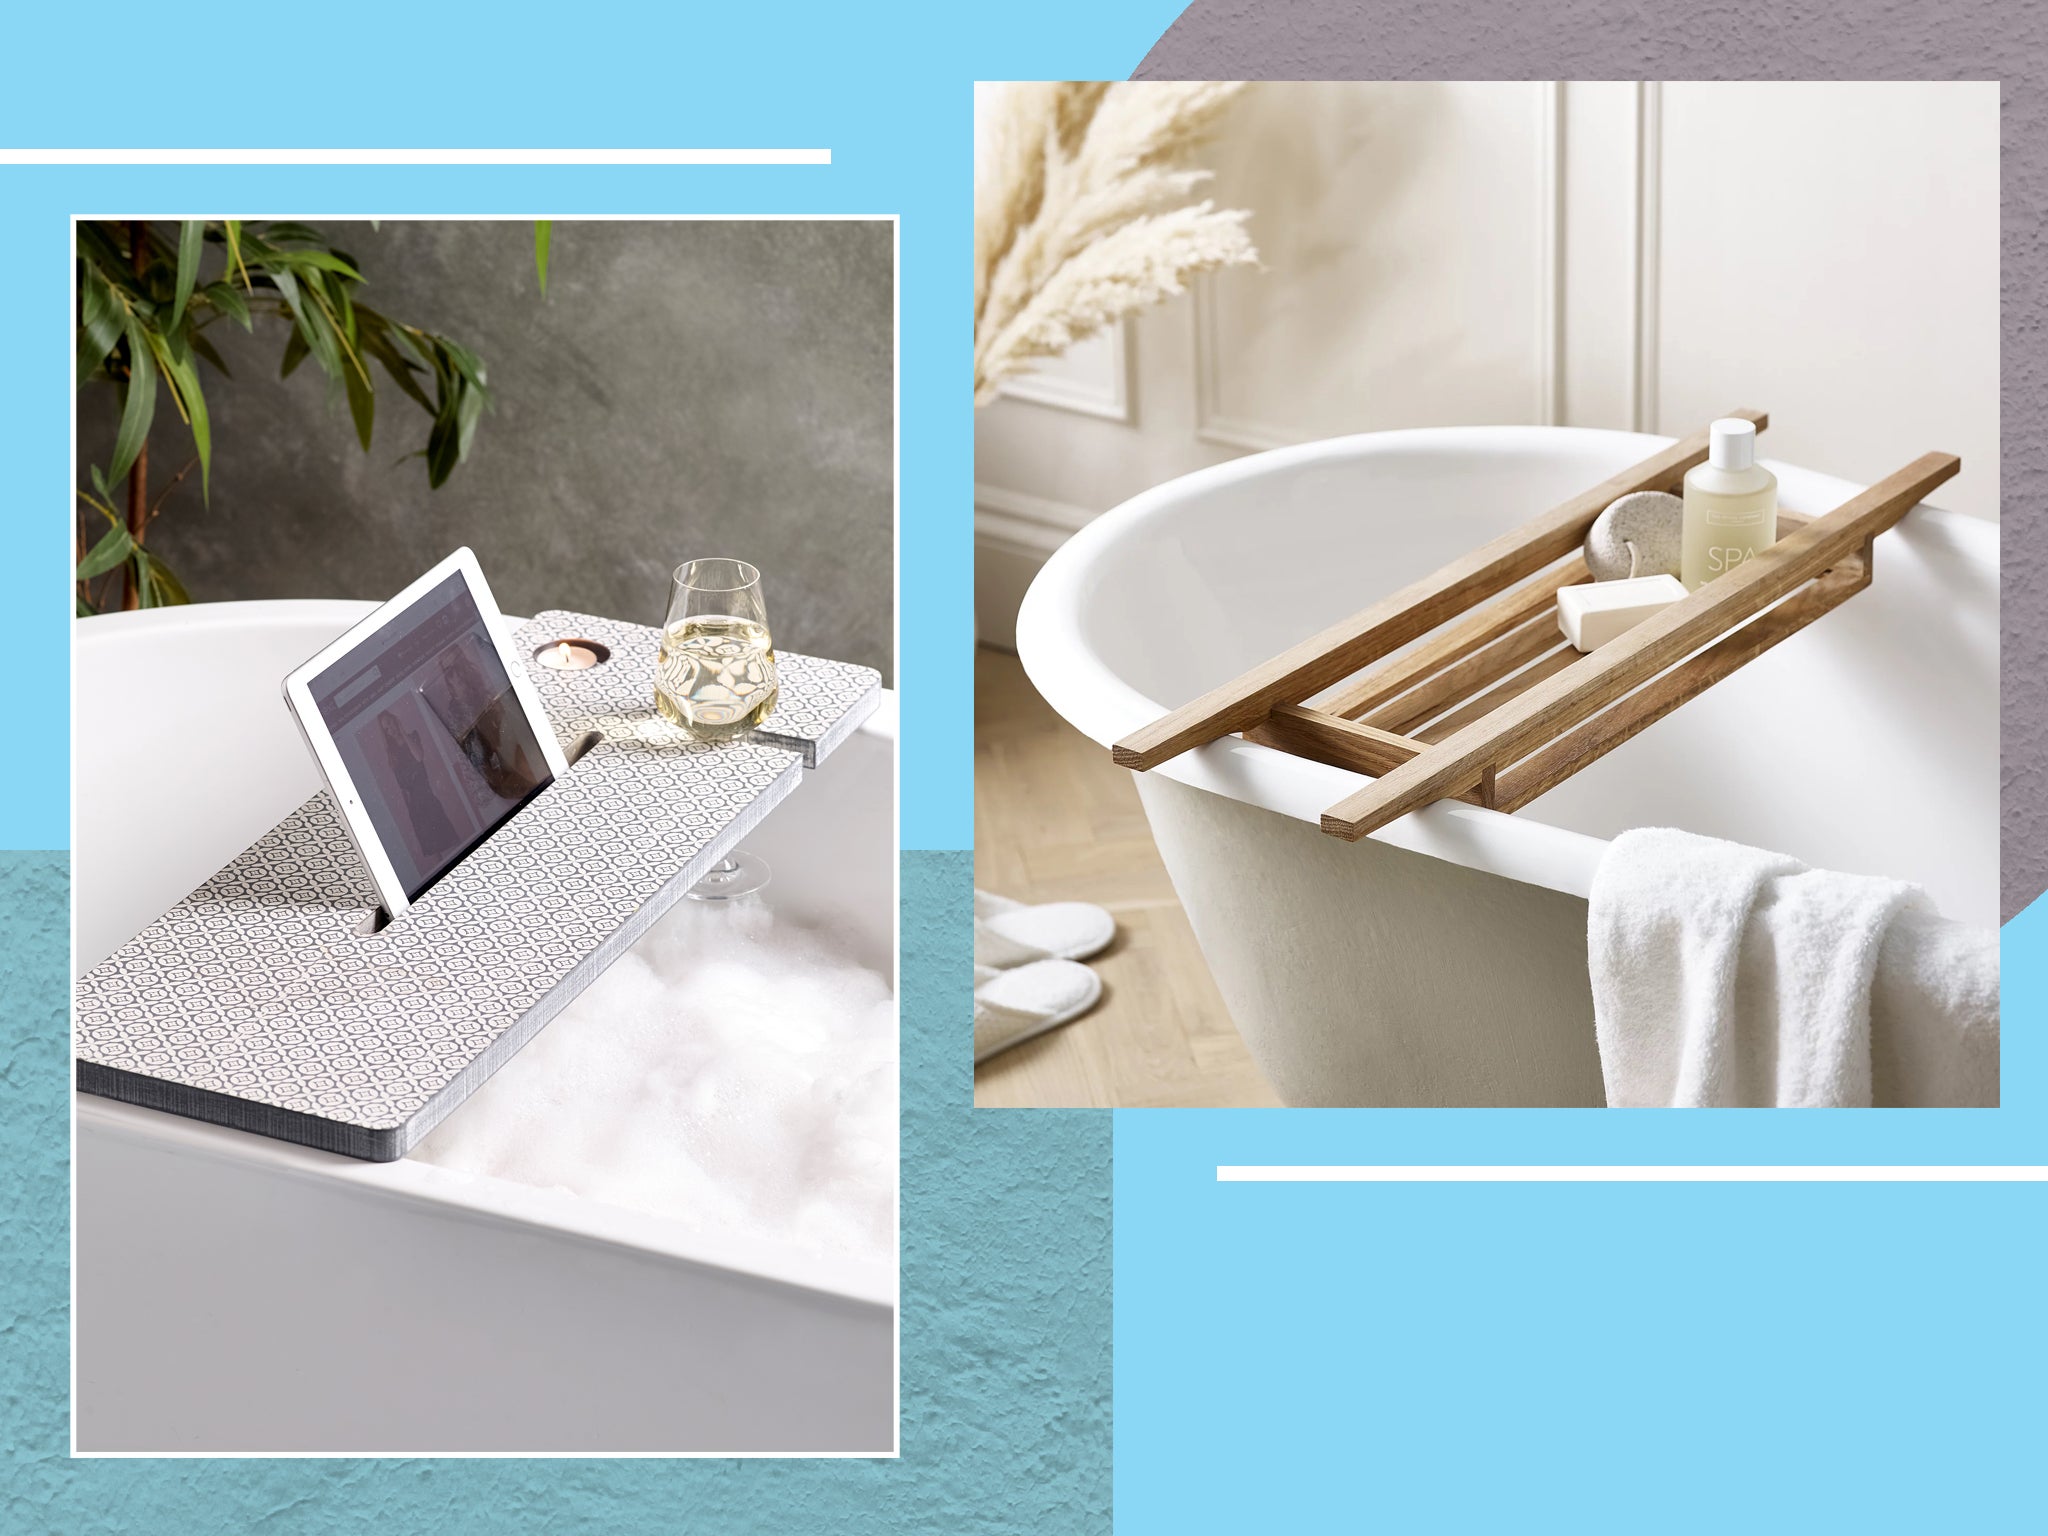 The latest bath trays come equipped with everything from book rests and wine glass holders to soap or incense dishes